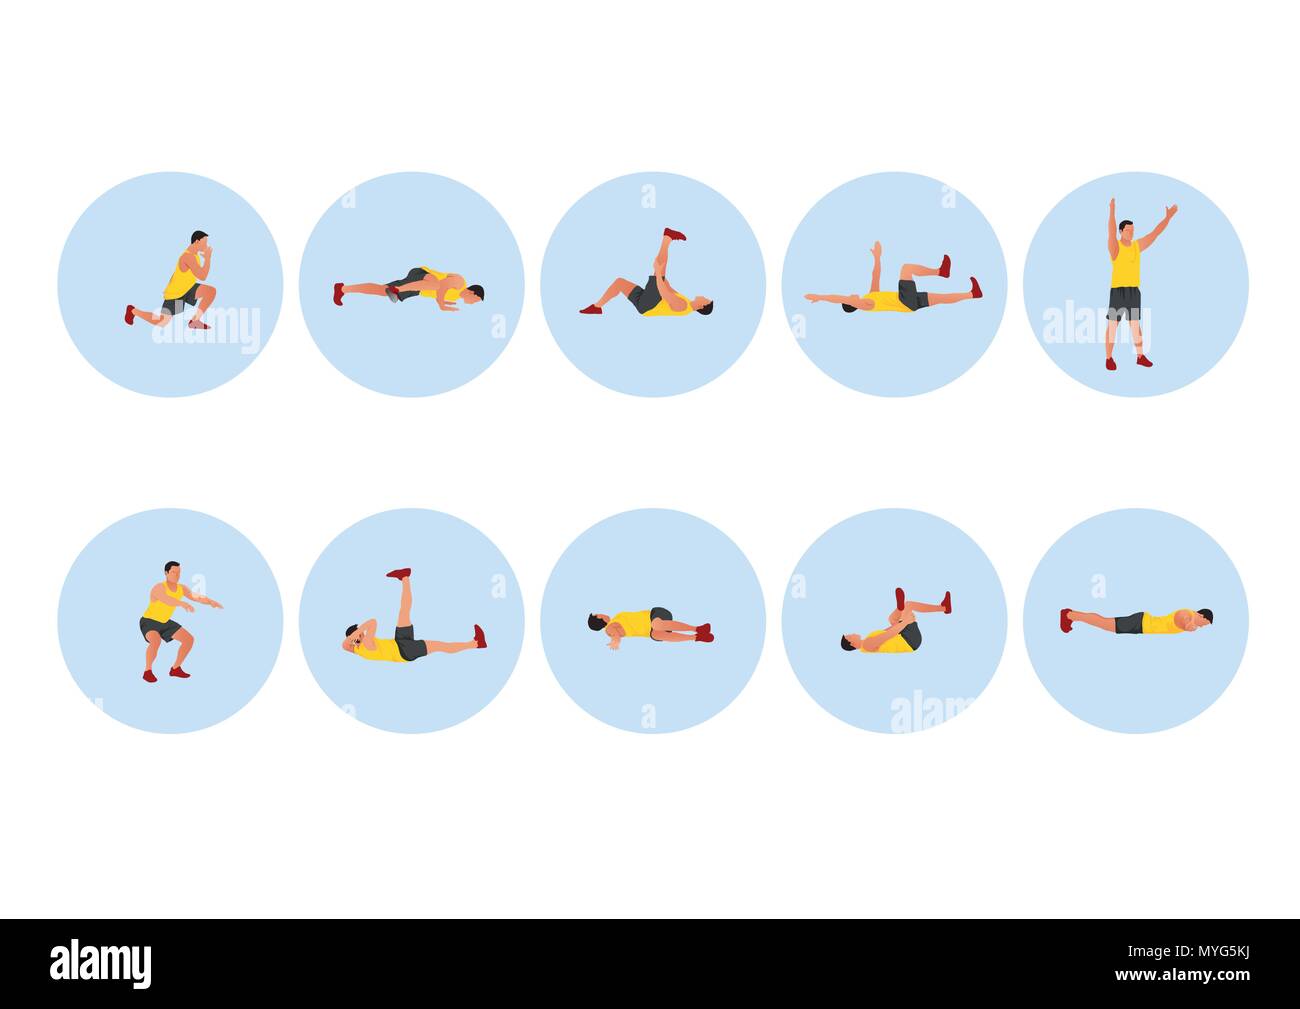 Training people icons set for sport and fitness. Flat style design vector illustration. 006 Stock Vector